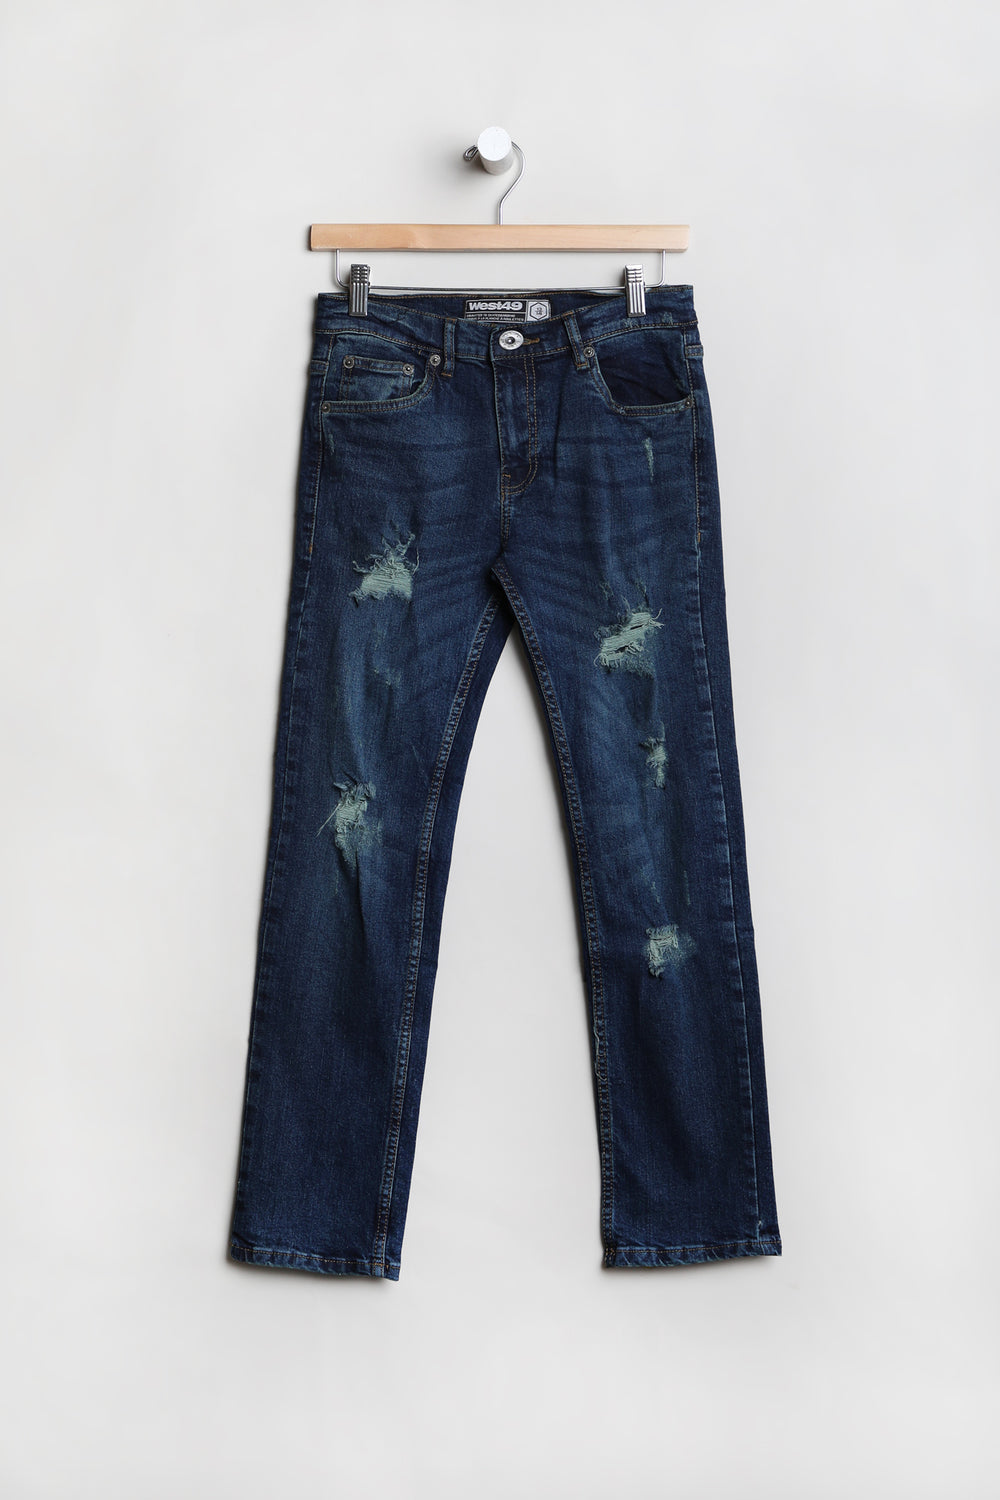 West49 Youth Distressed Slim Jeans West49 Youth Distressed Slim Jeans